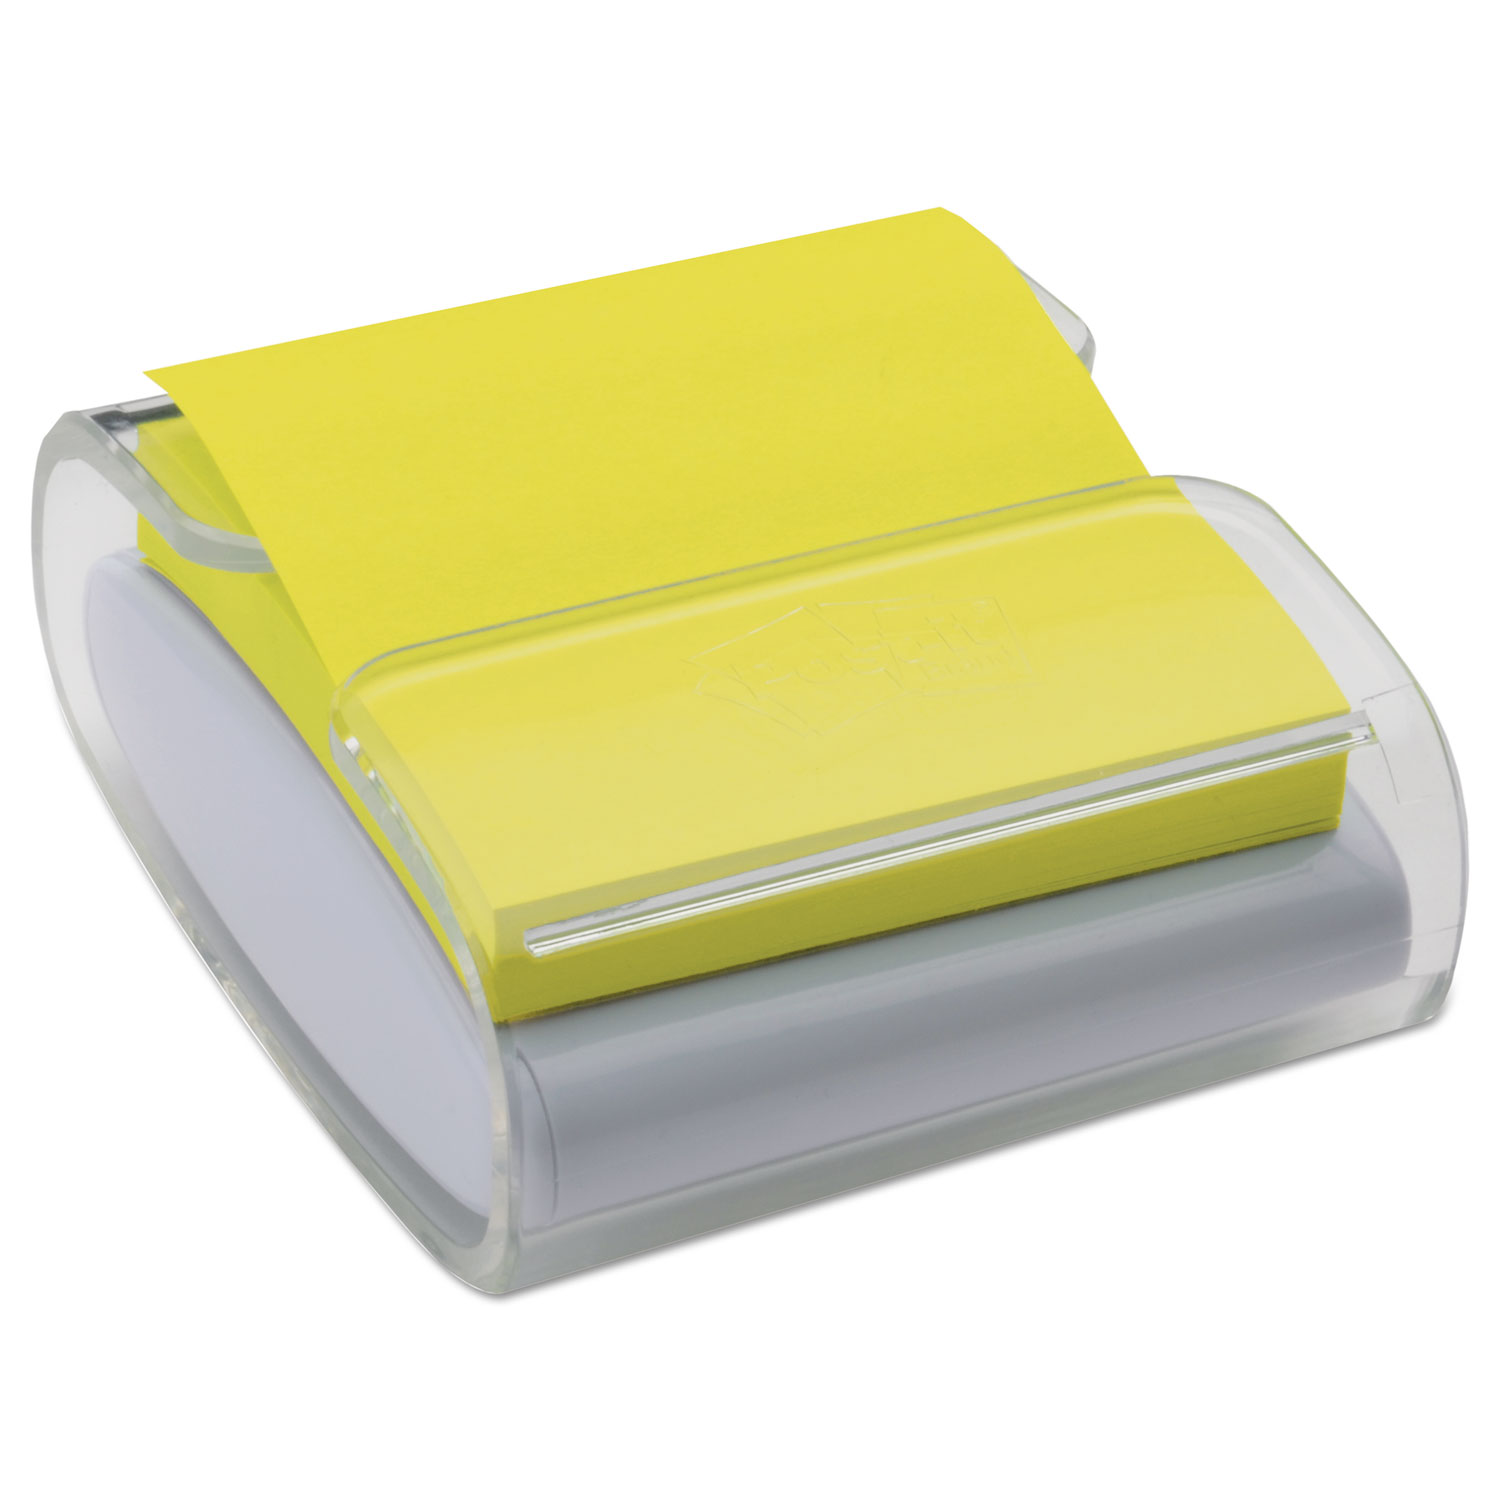  Post-it Pop-up Notes Super Sticky WD-330-WH Wrap Dispenser, For 3 x 3 Pads, White/Clear (MMMWD330WH) 